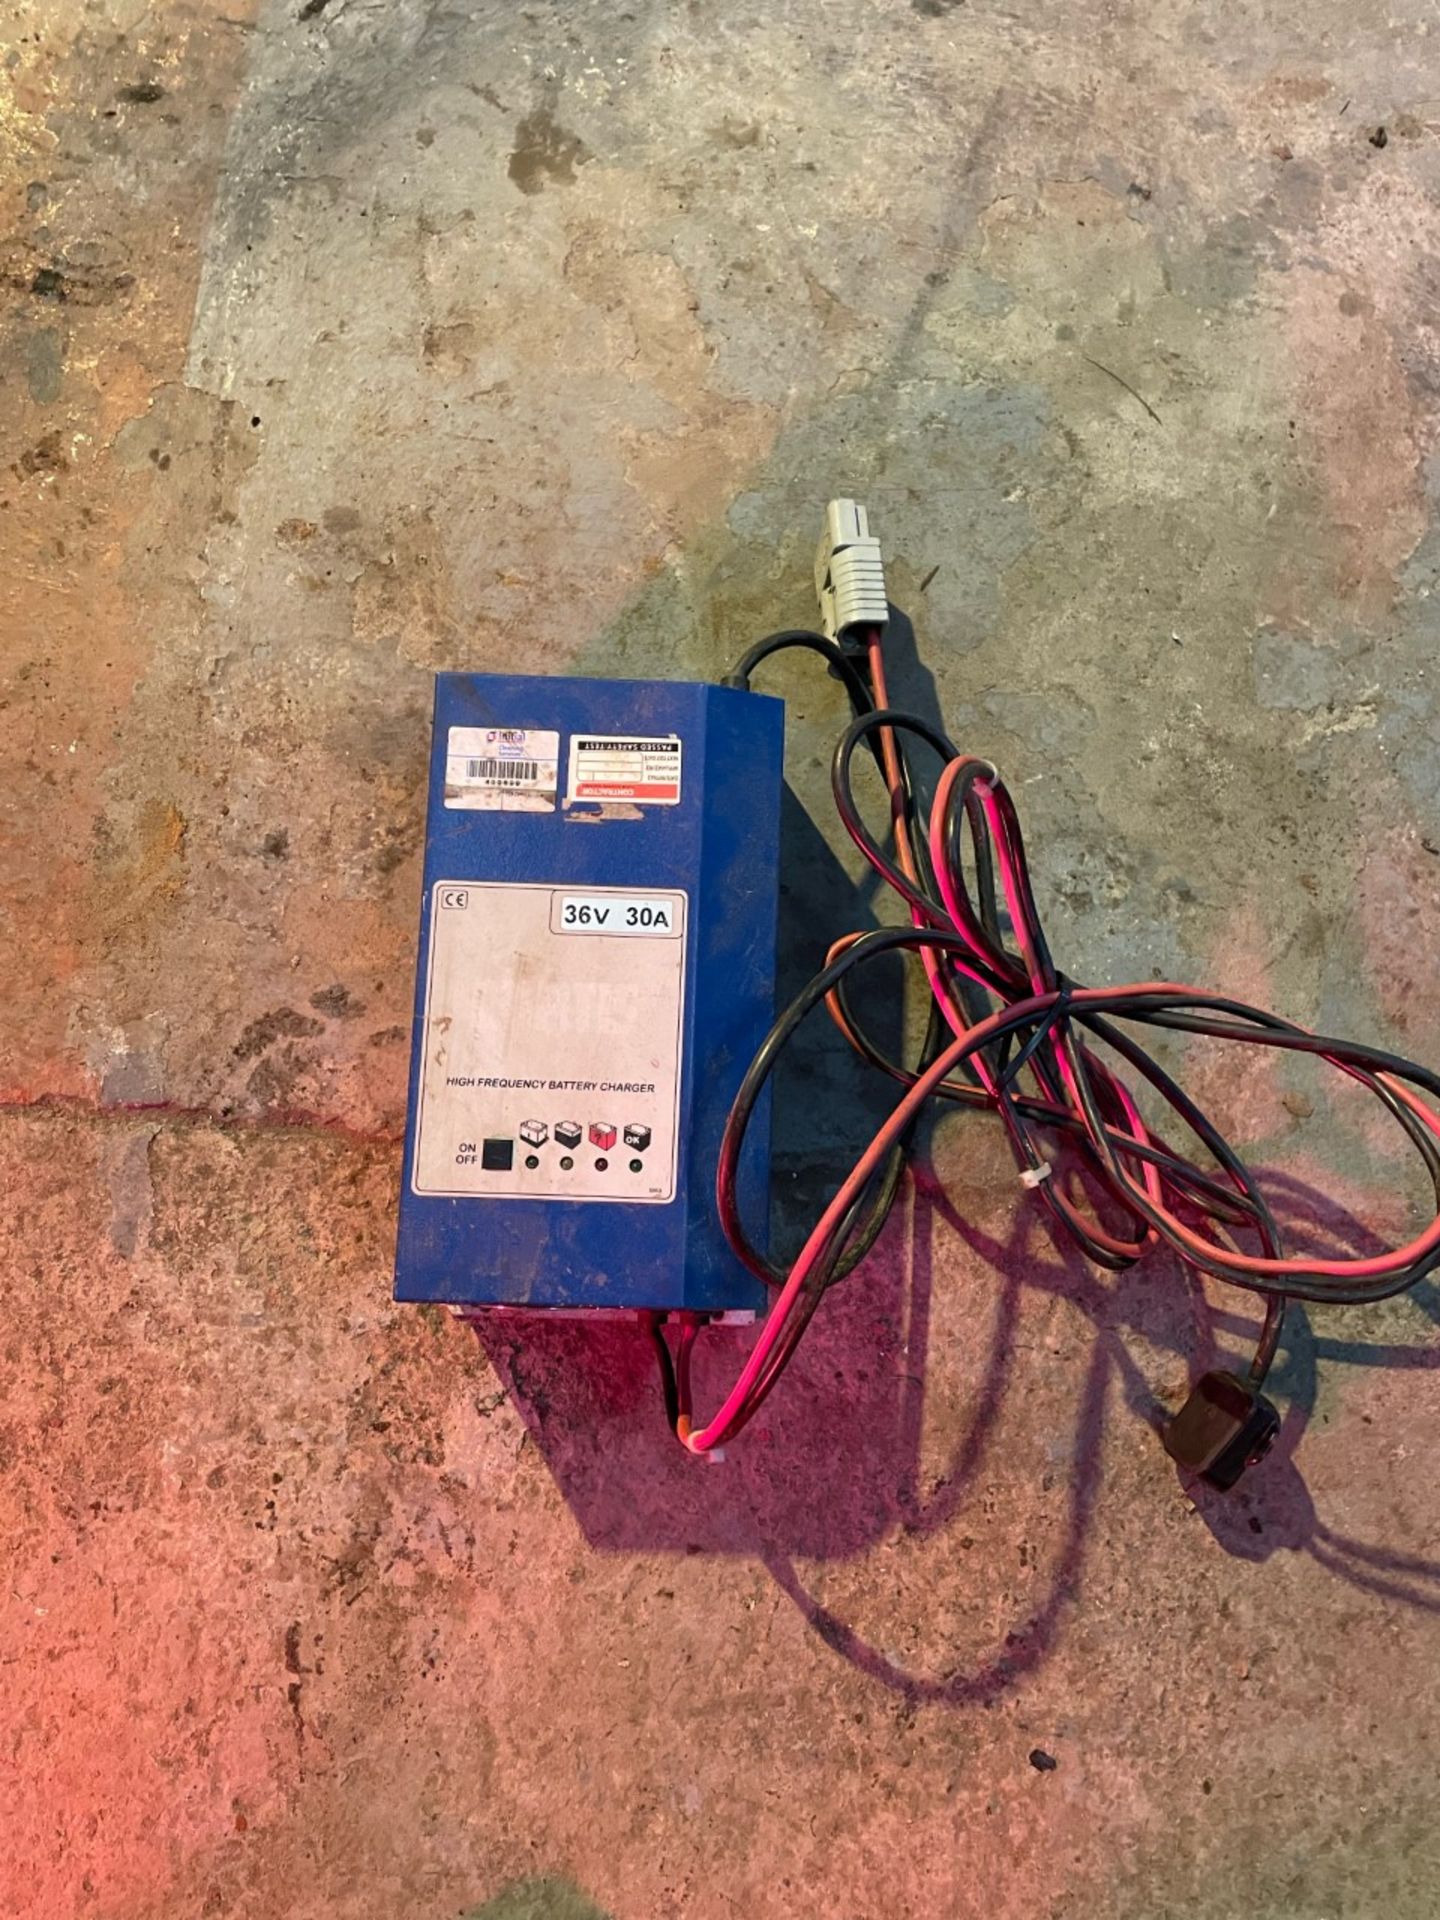 Curtis 36v 30A high frequency battery charger for floor cleaner